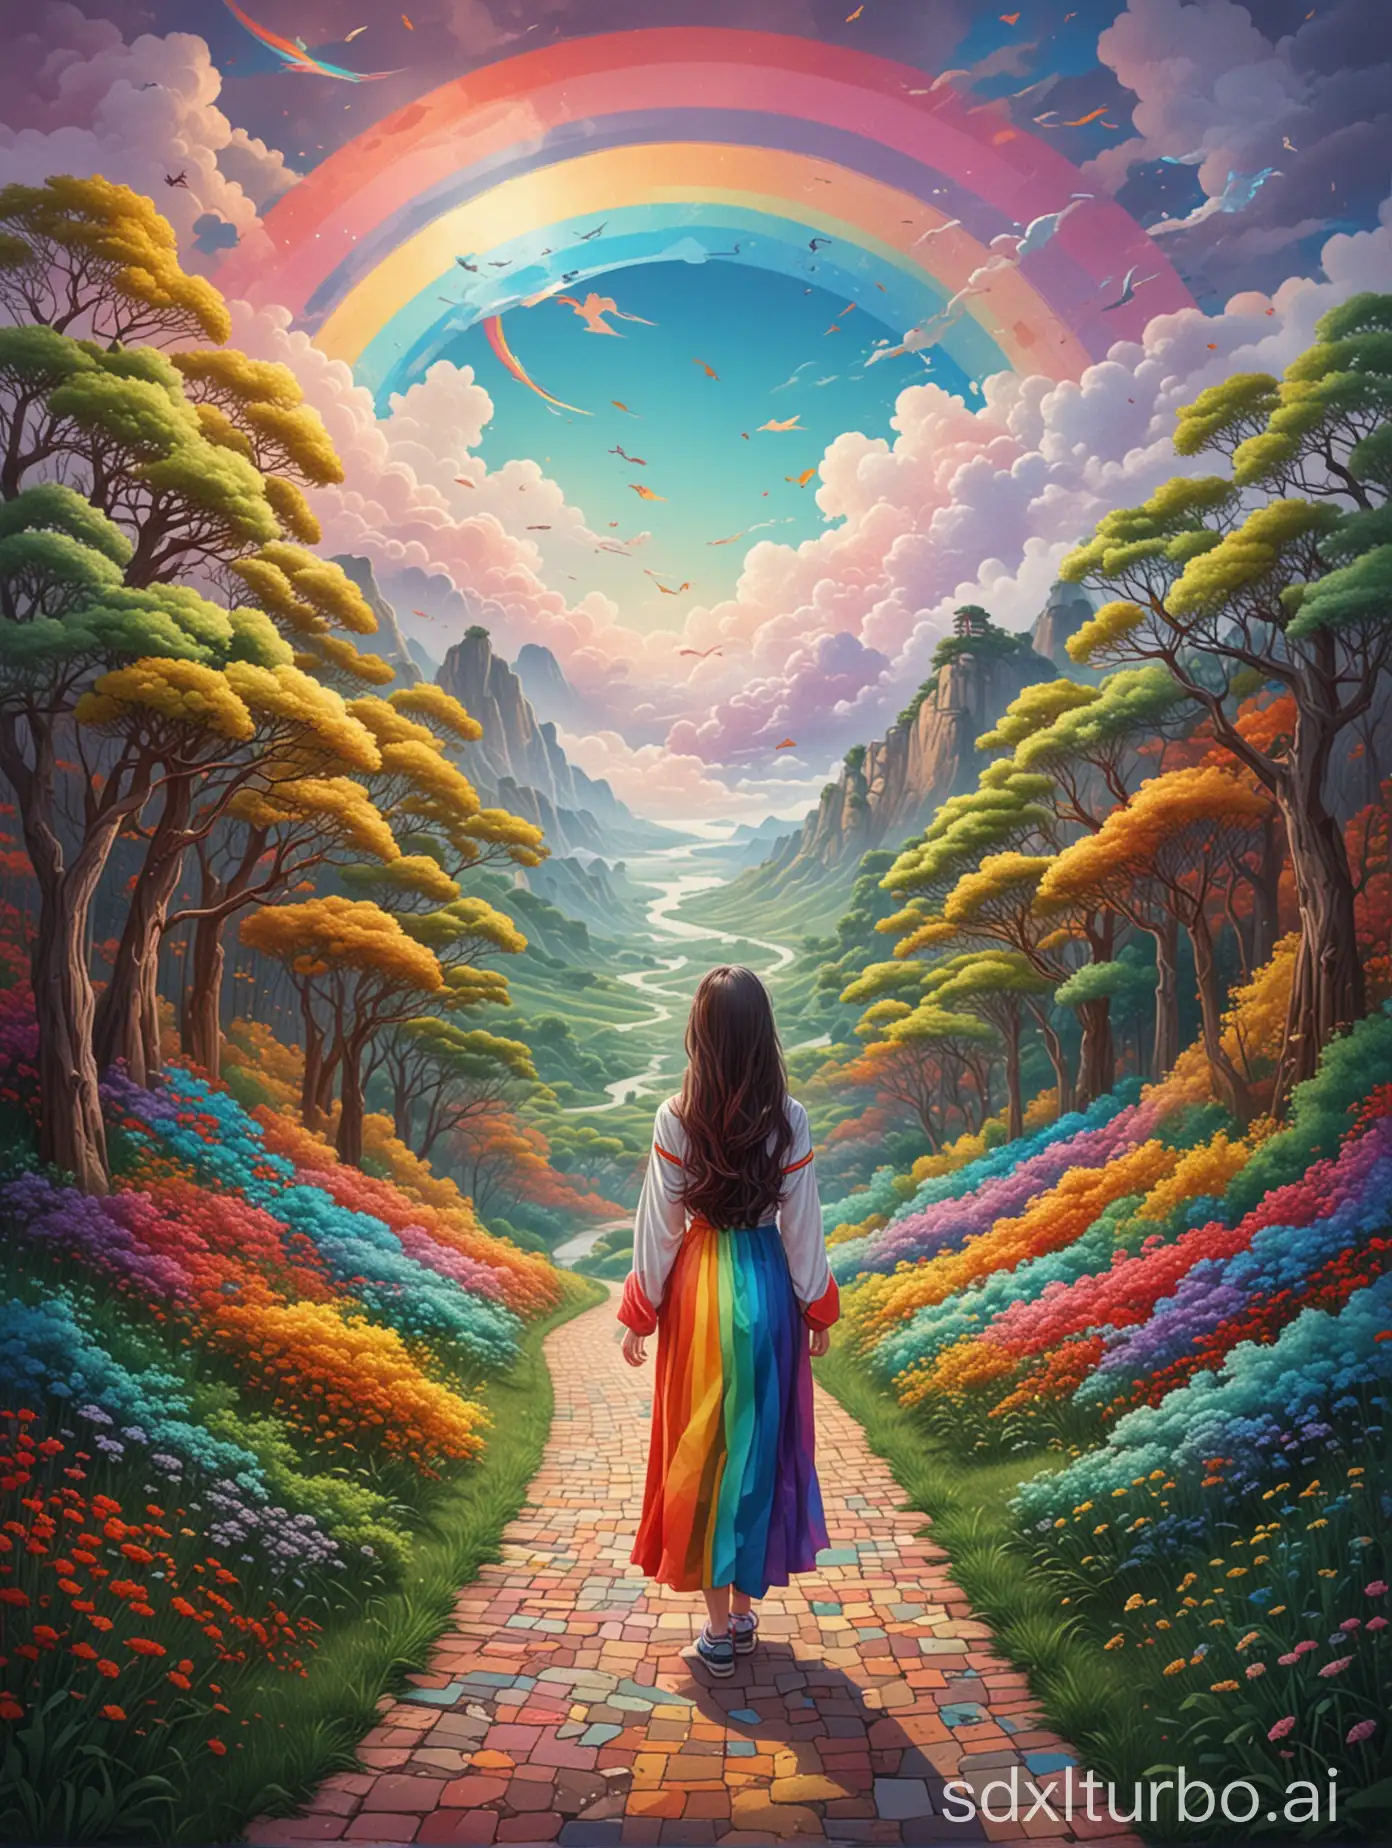 (masterpiece, best quality:1.2),art illustration，girl portrait，often neck，hair by clouds，Extra long hair paved with winding paths，Small silhouette on the path，Baiyun，rainbow，The composition，stitching，trees， rainbow,  , Contrasting colors, in the spring landscape, Abstract surreal colors,rich and colorful, popular geometric surrealism, rainbow色的梦想， icon design, Rozmin trip, vector art，